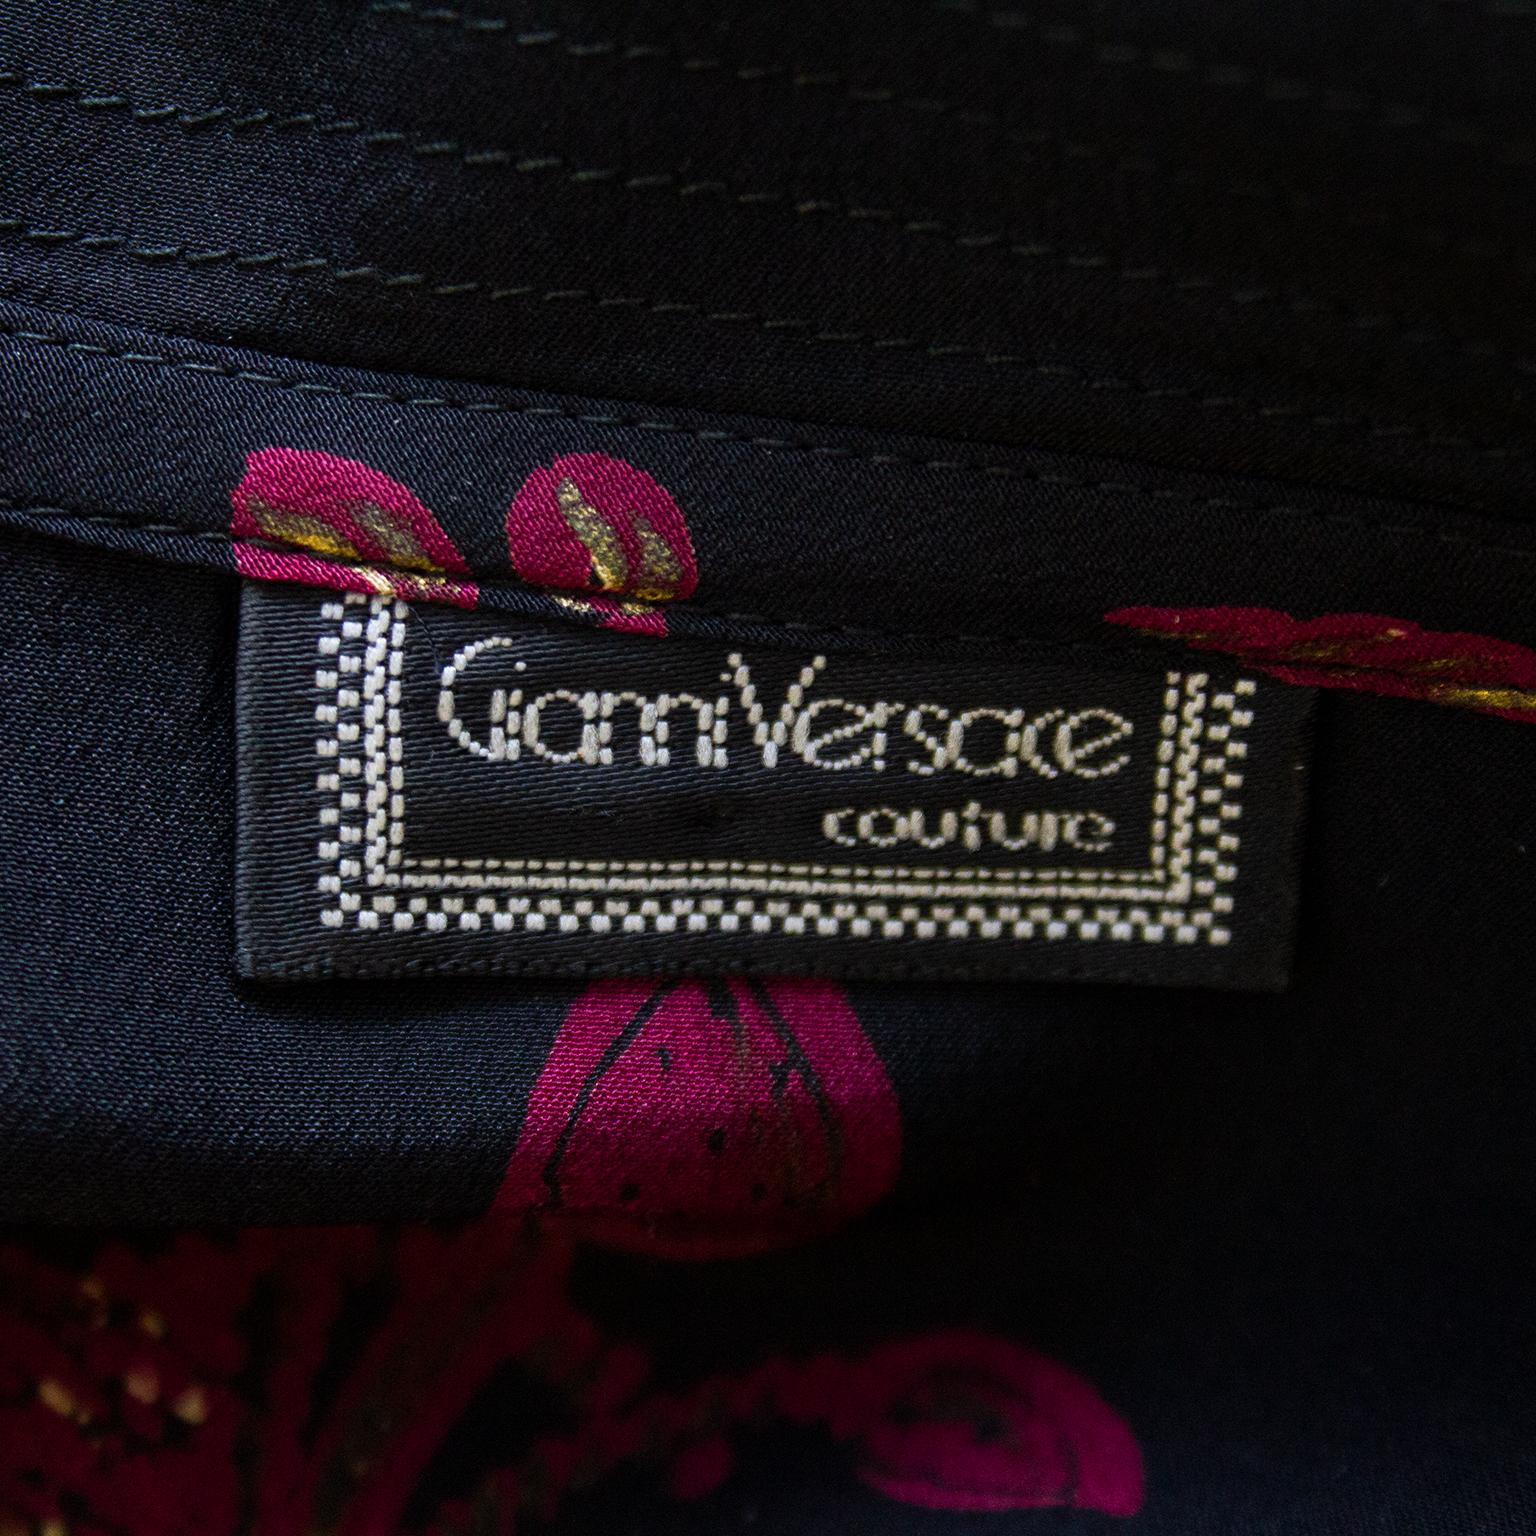 1990s Gianni Versace Couture Black Silk Blouse w Gold and Maroon Botanical Print In Good Condition For Sale In Toronto, Ontario